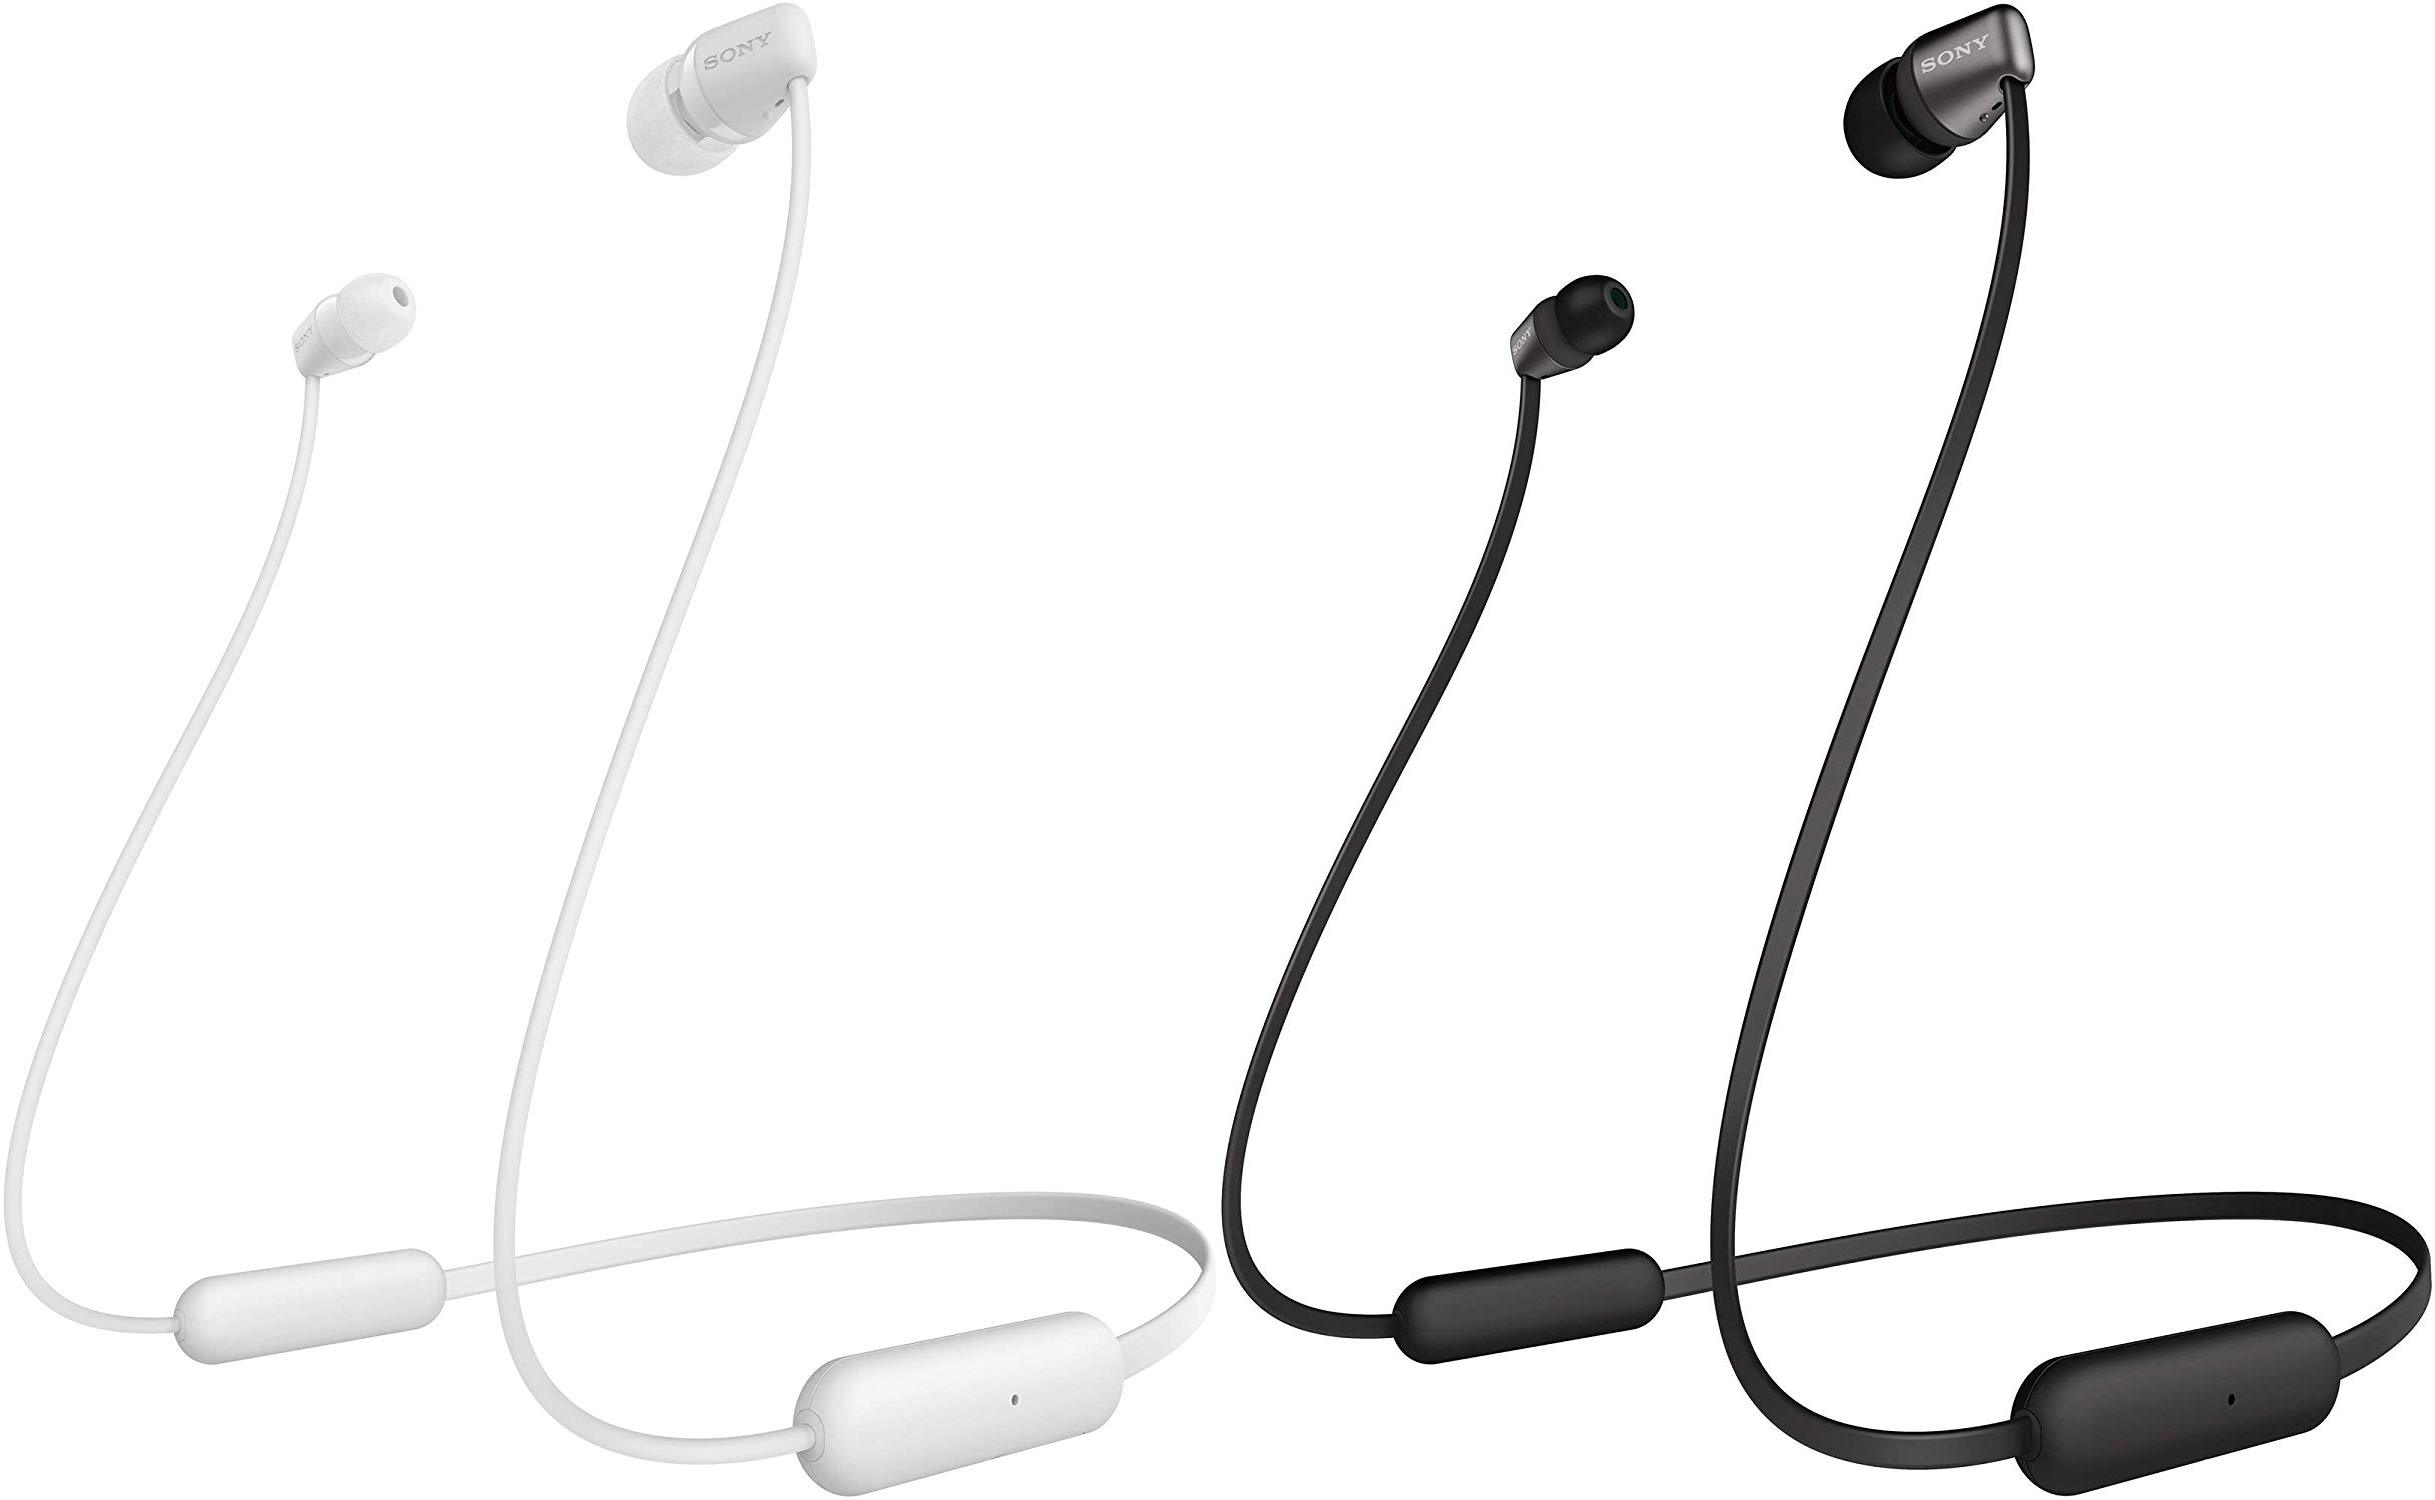 Sony WI C200 and WI C310 wireless earphones launched in India starting at Rs. 2490